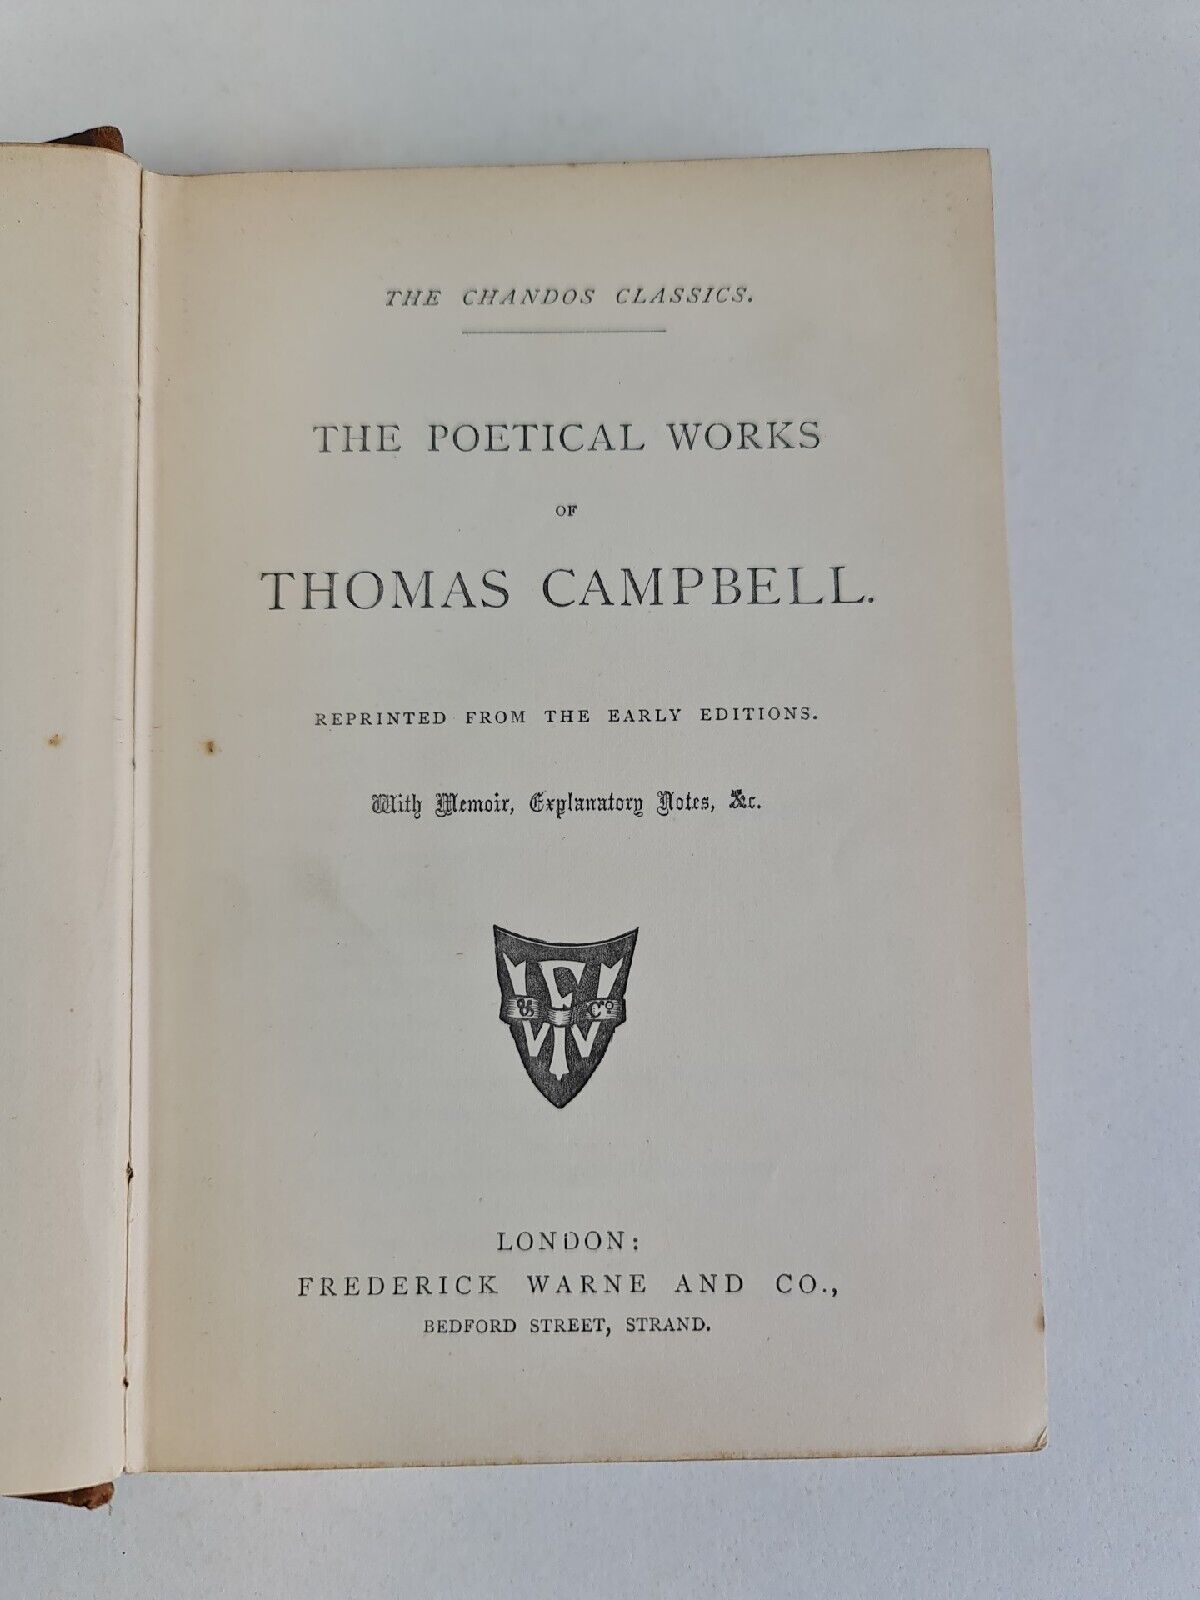 The Poetical Works of Thomas Campbell (Chandos Classics)